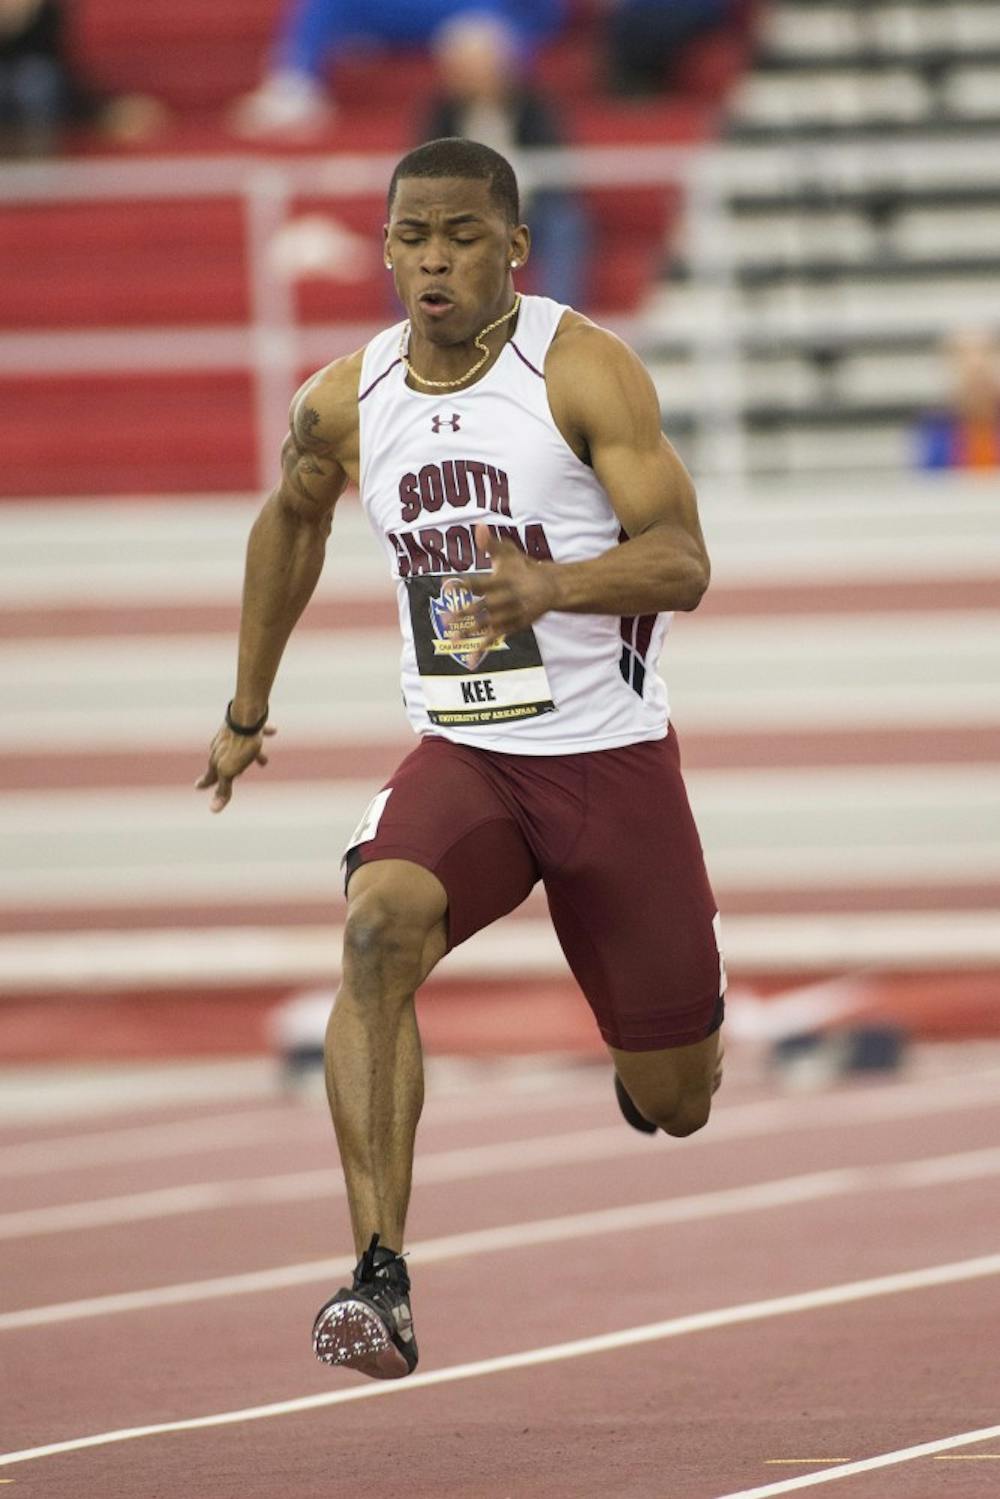 SEC Indoor Track Championships 2013 at the Randall Tyson Track Center in Fayetteville, Ark.